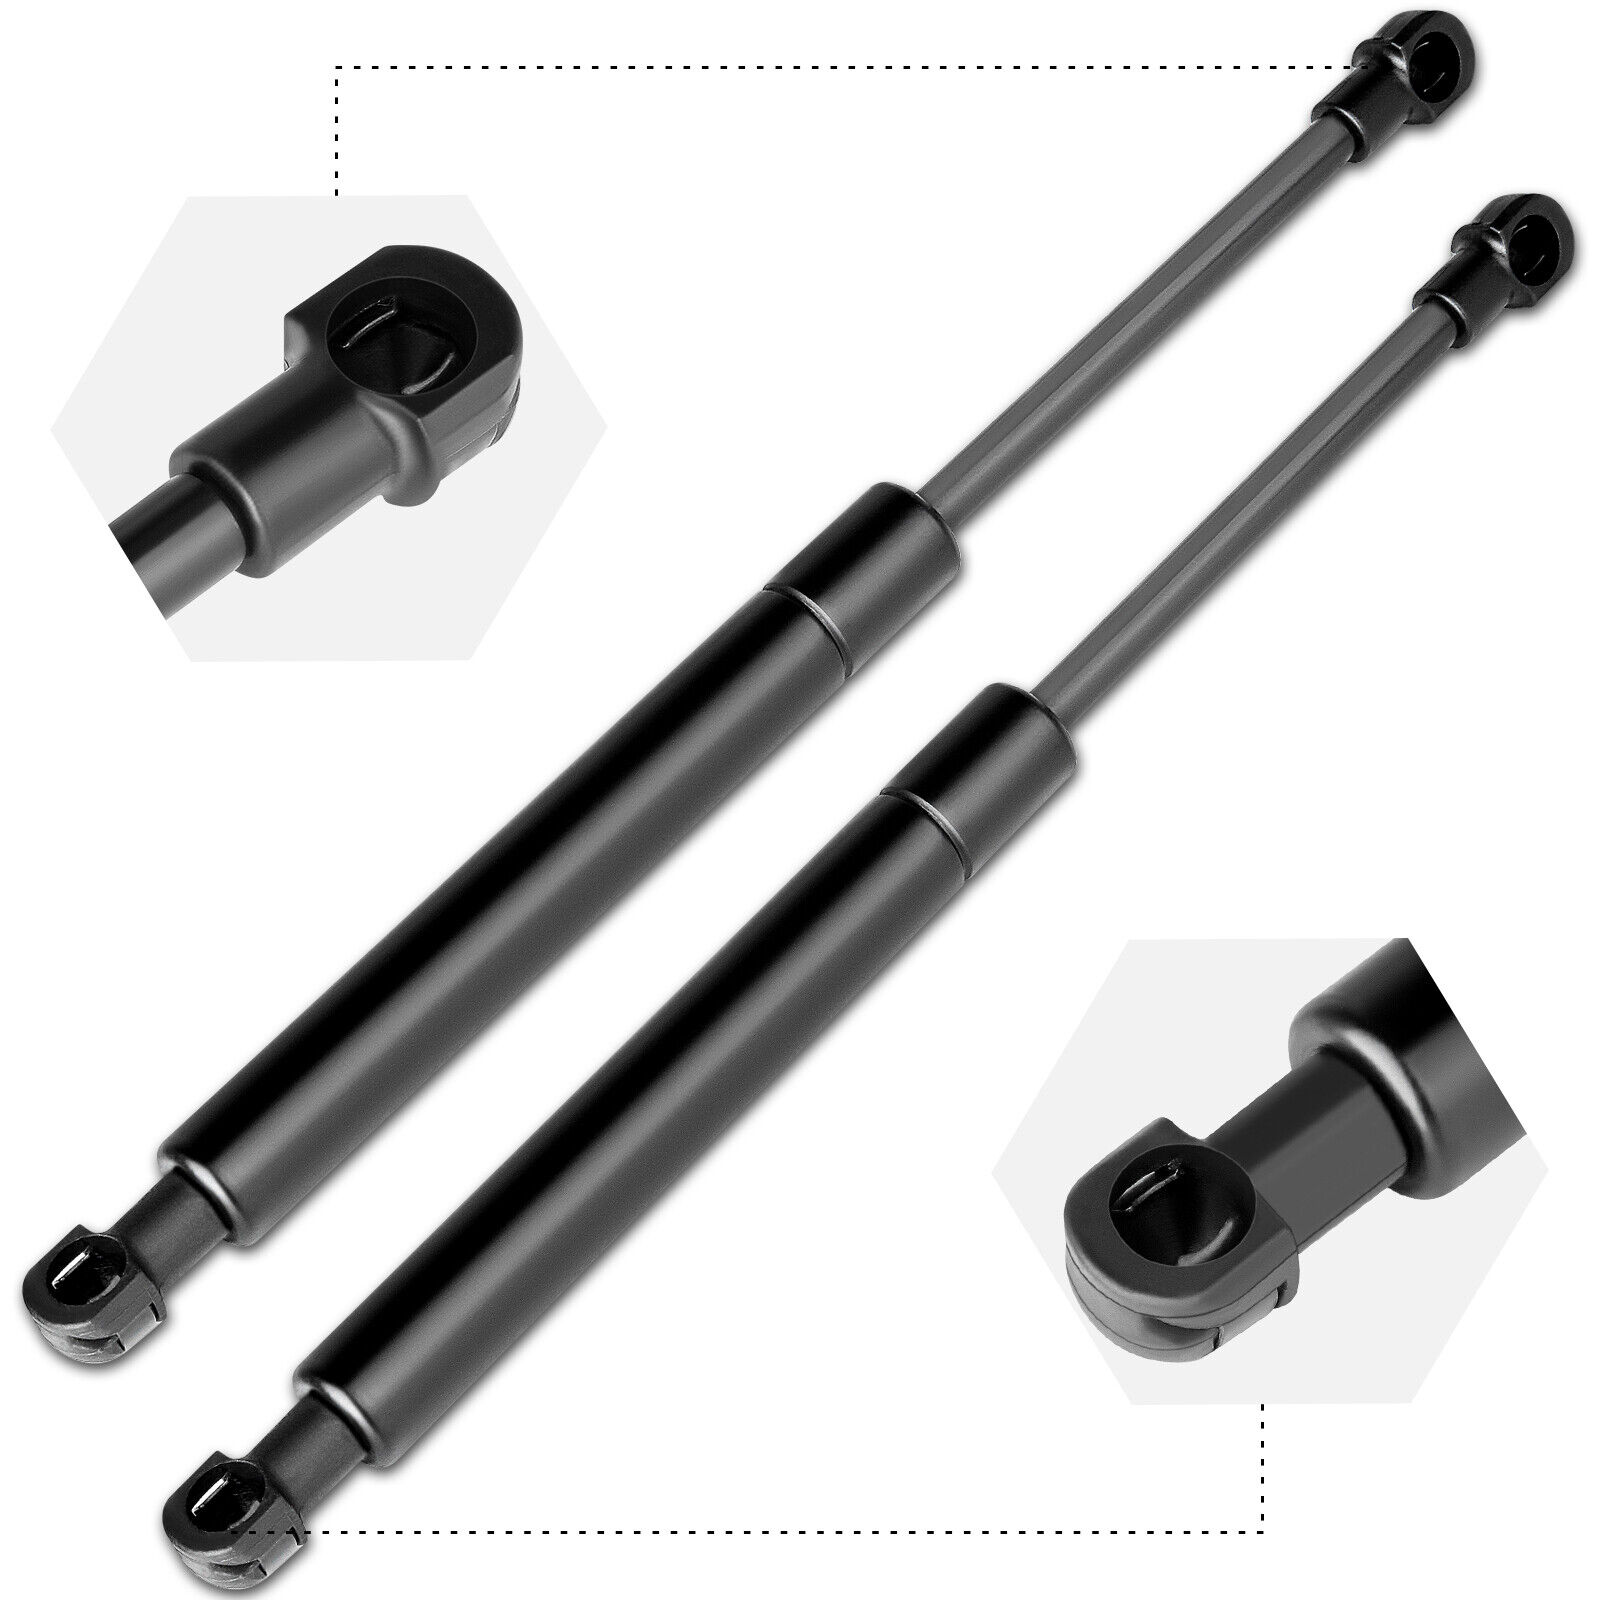 2 Front Hood Lift Support Struts Shocks for 1999-2004 Jeep Grand Cherokee 4.0L